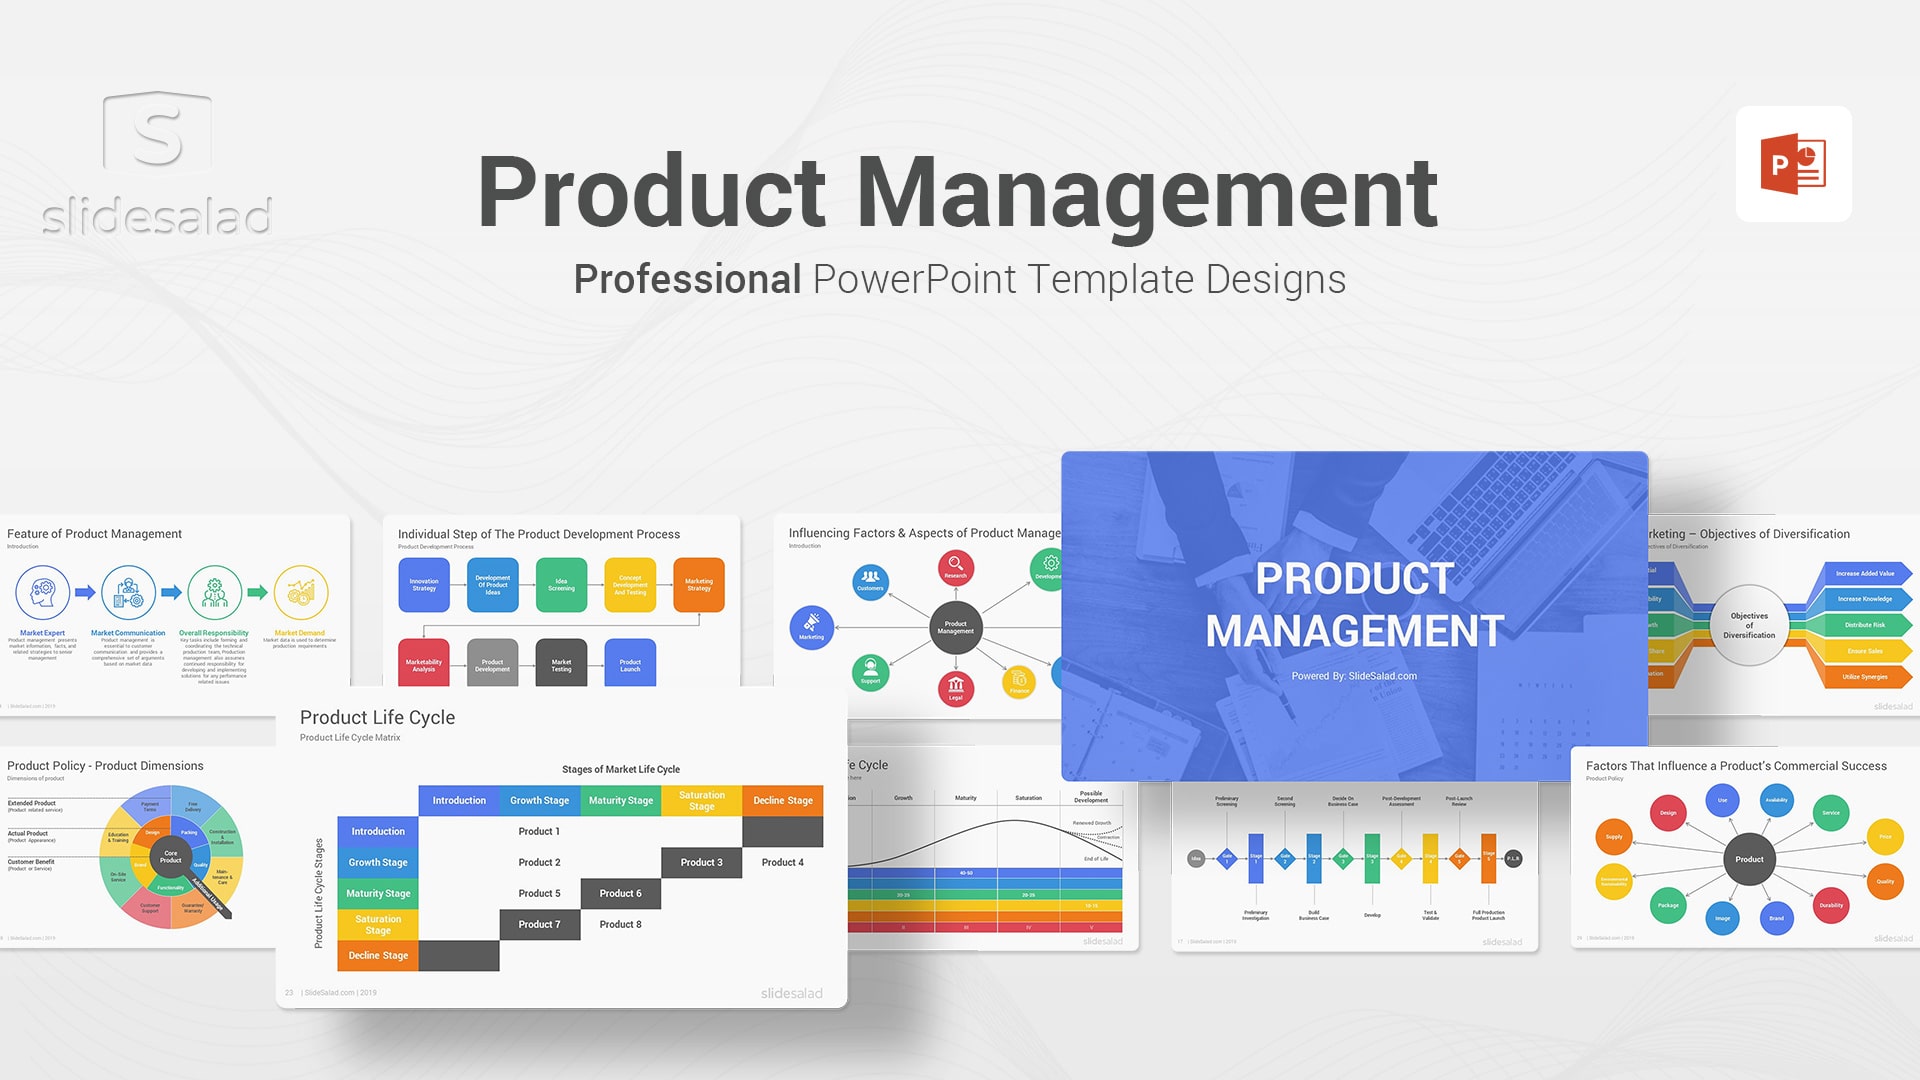 Product Management PowerPoint Template - Minimalist Presentation PPT Example